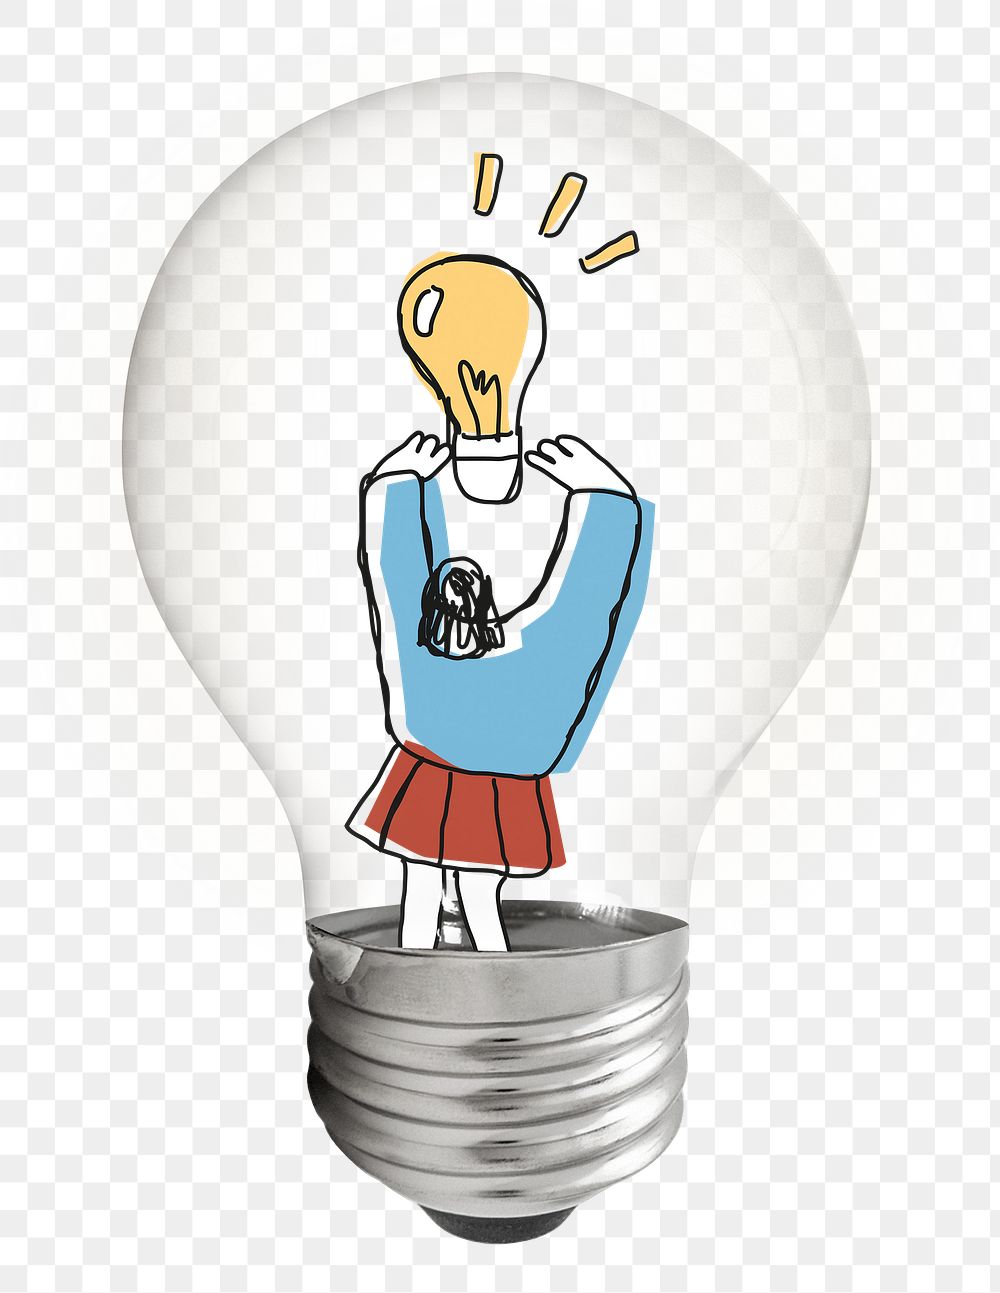 Png woman holding light bulb sticker, creative business illustration on transparent background